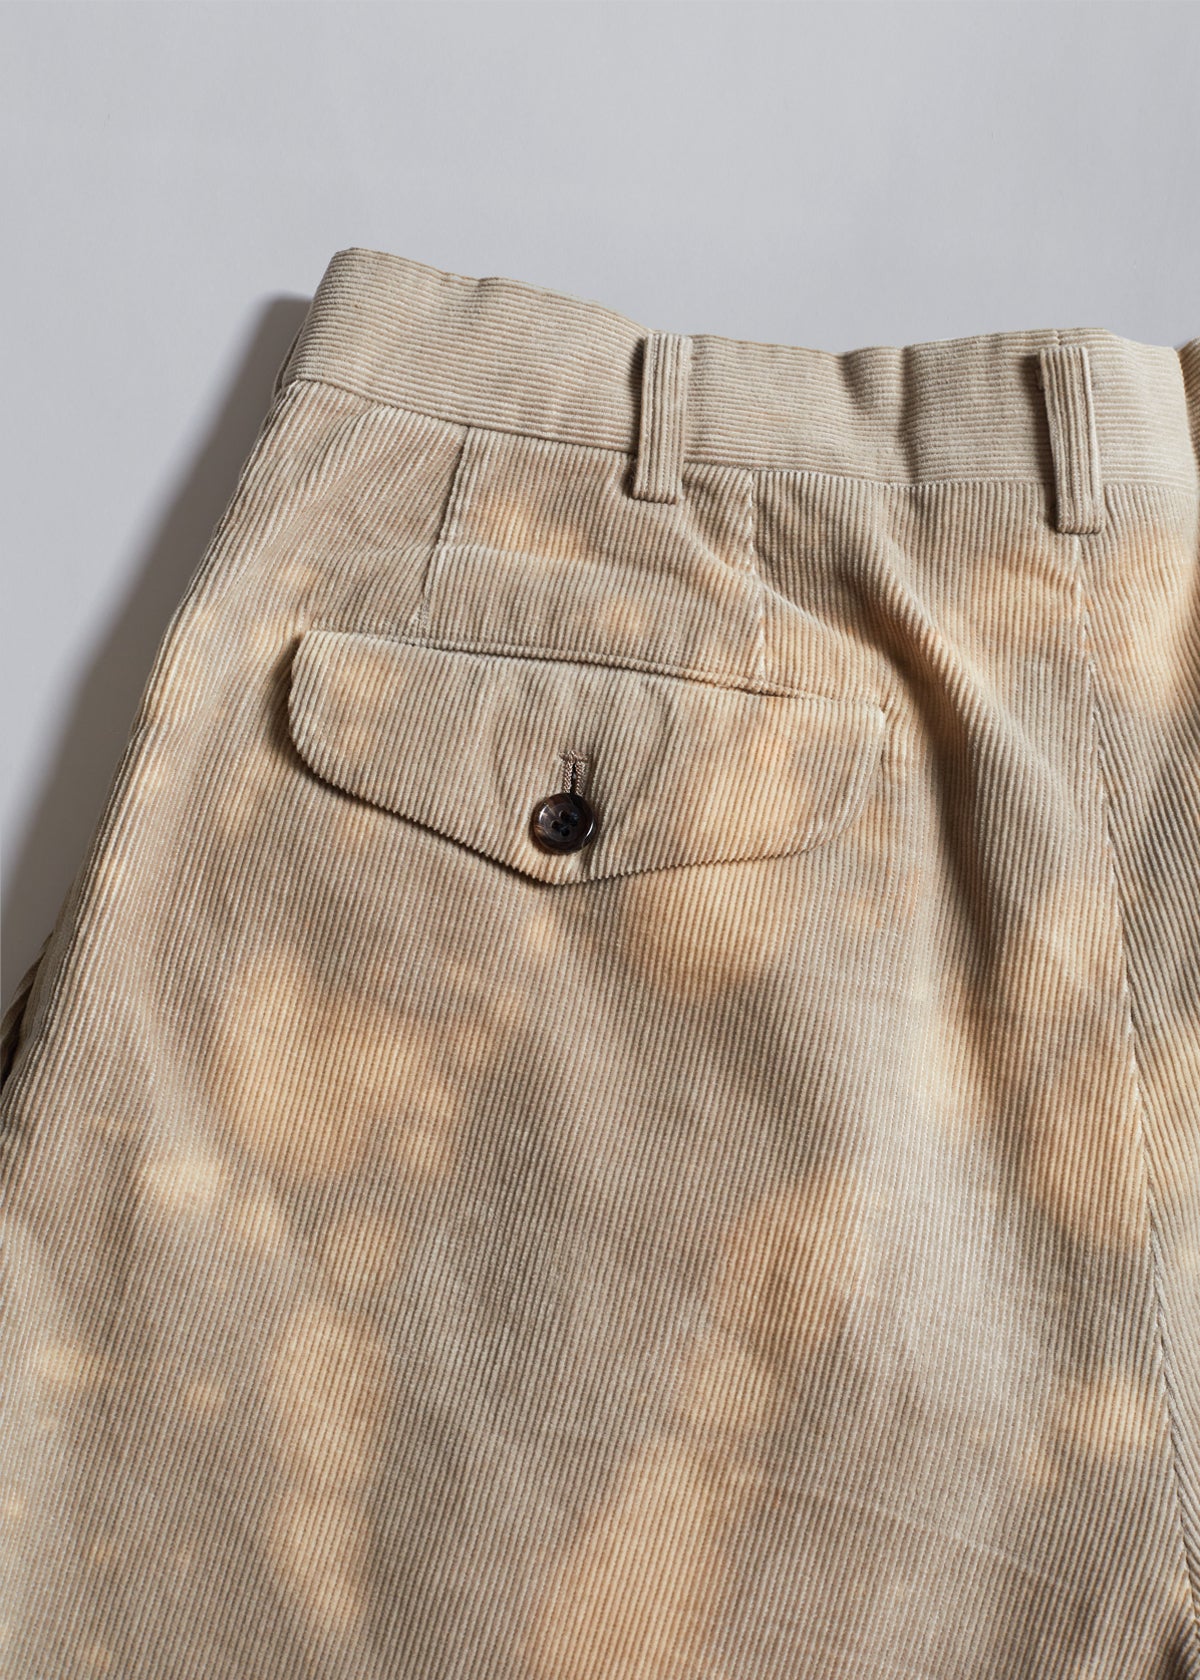 Homme Bleached Corduroy Pants AW1994 - Medium - The Archivist Store